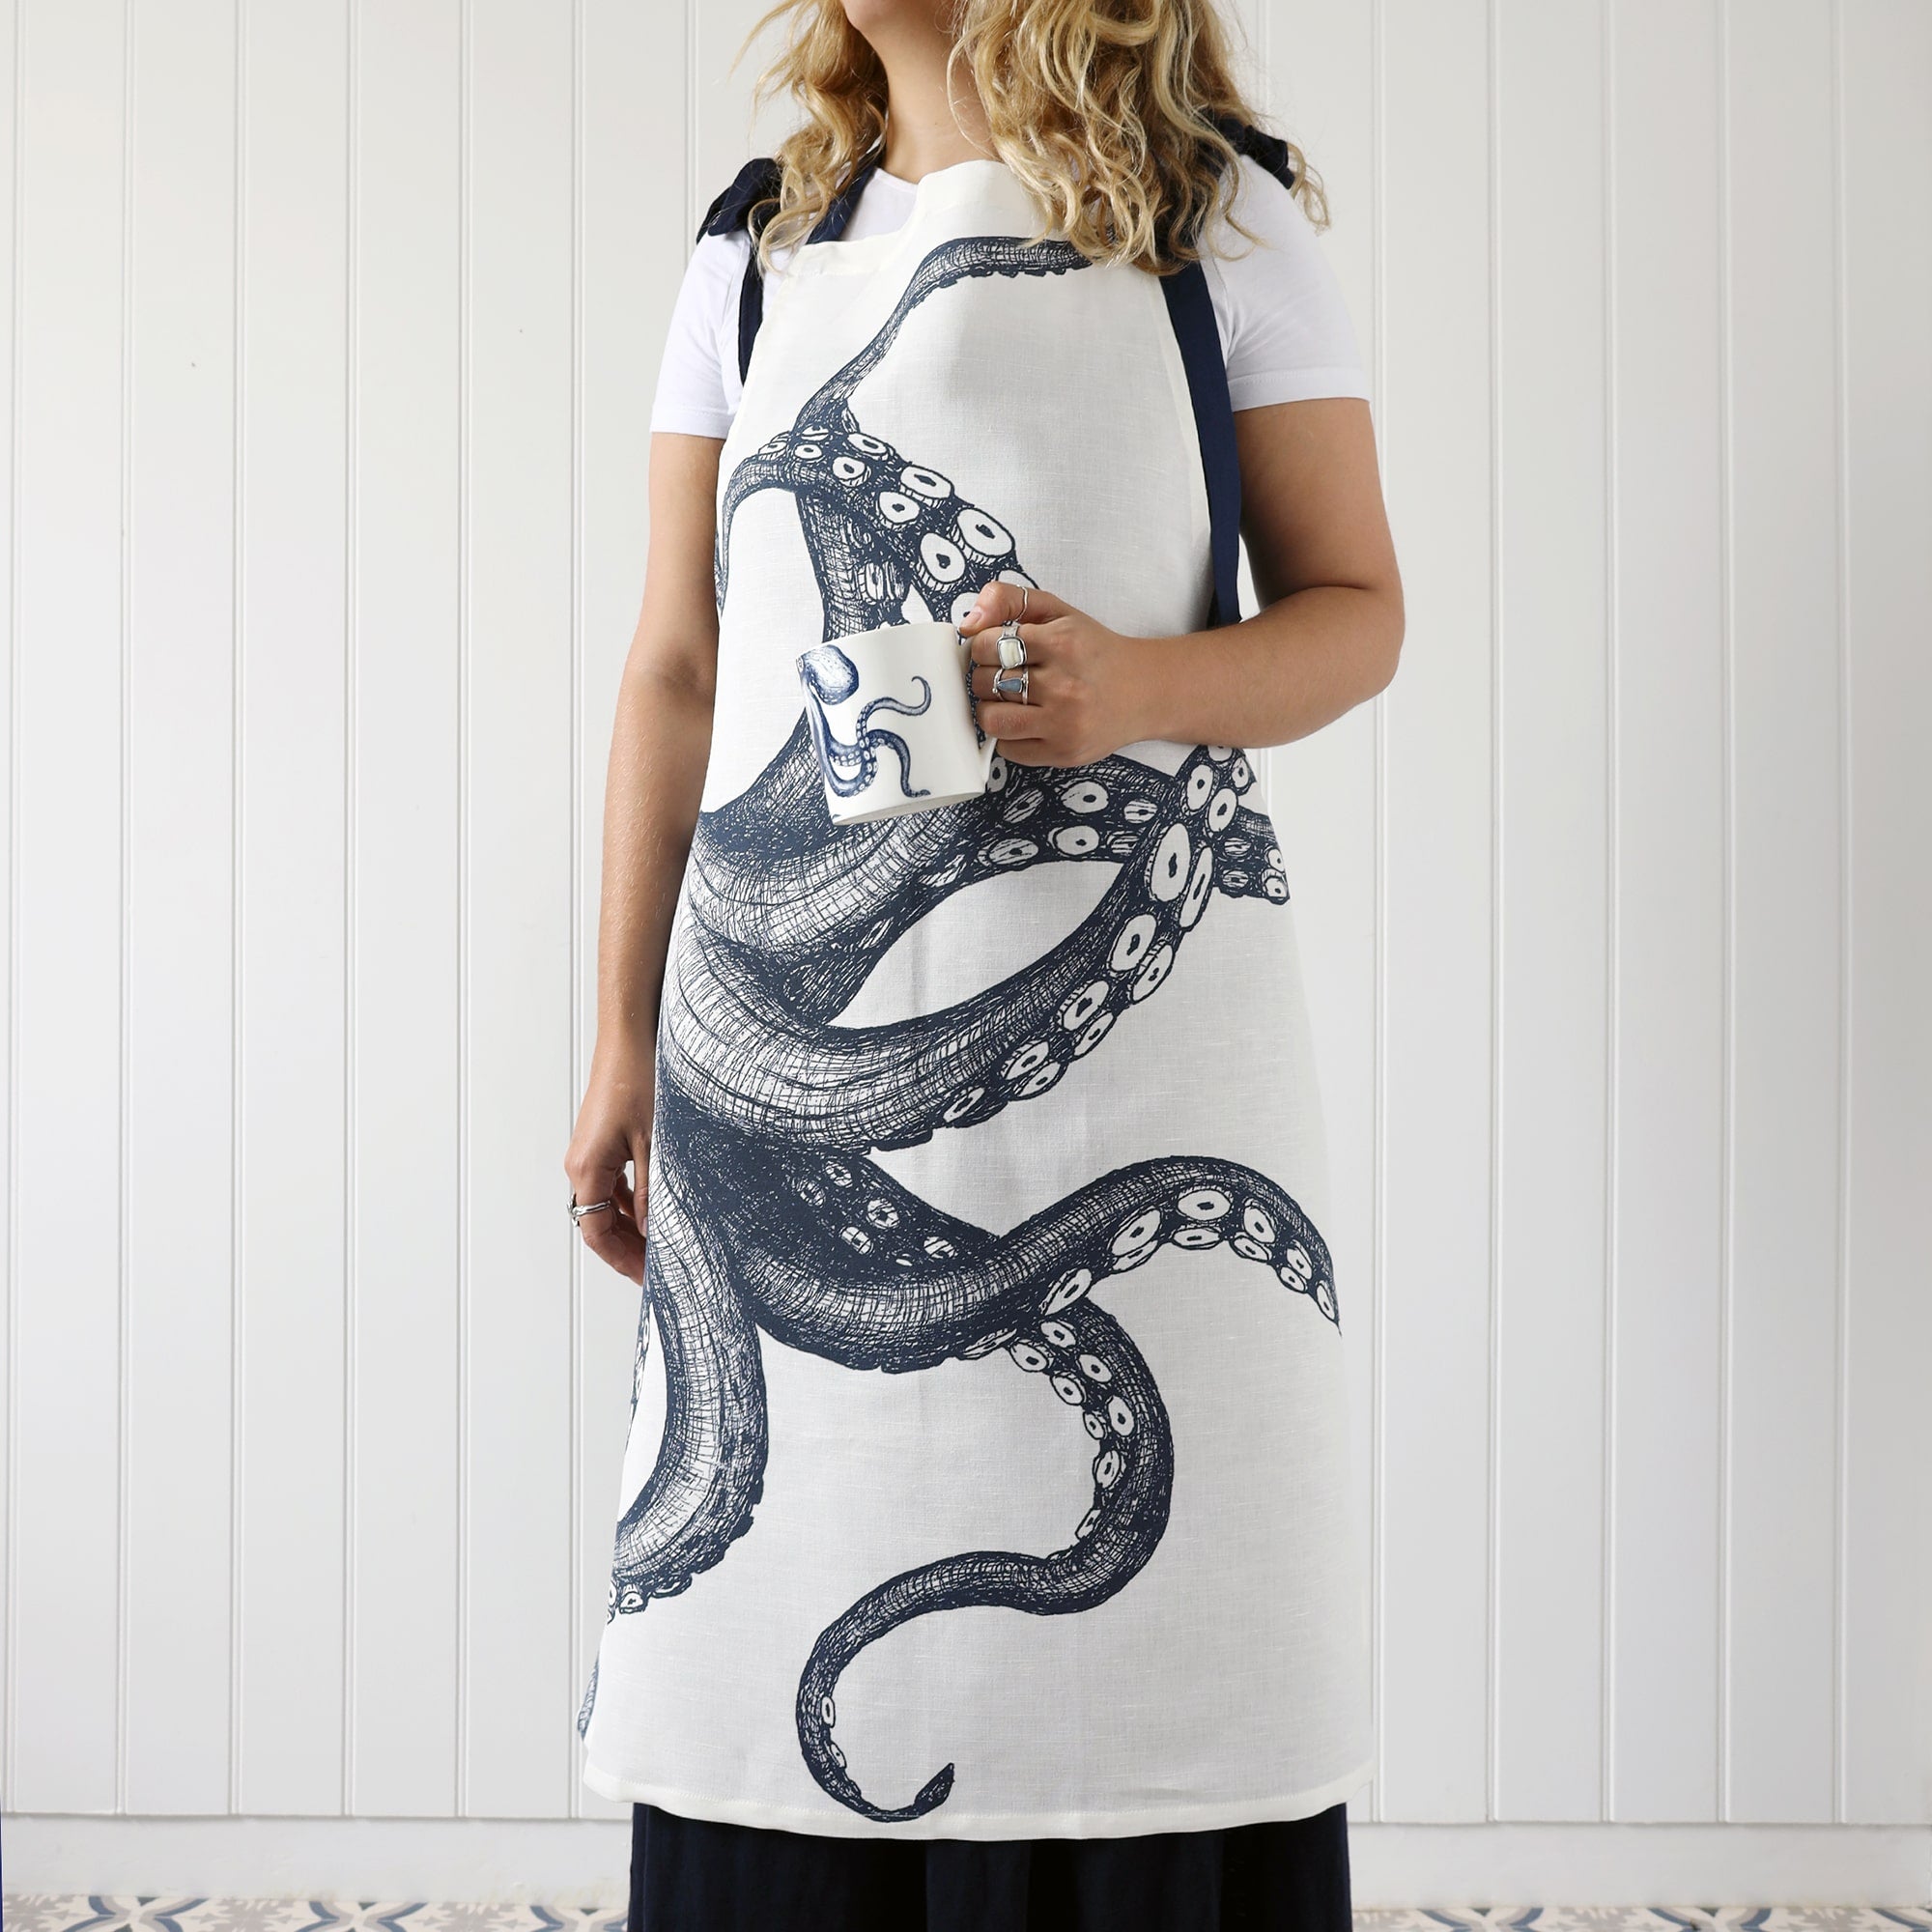 Our octopus apron being worn by a model who is also holding an octopus mug